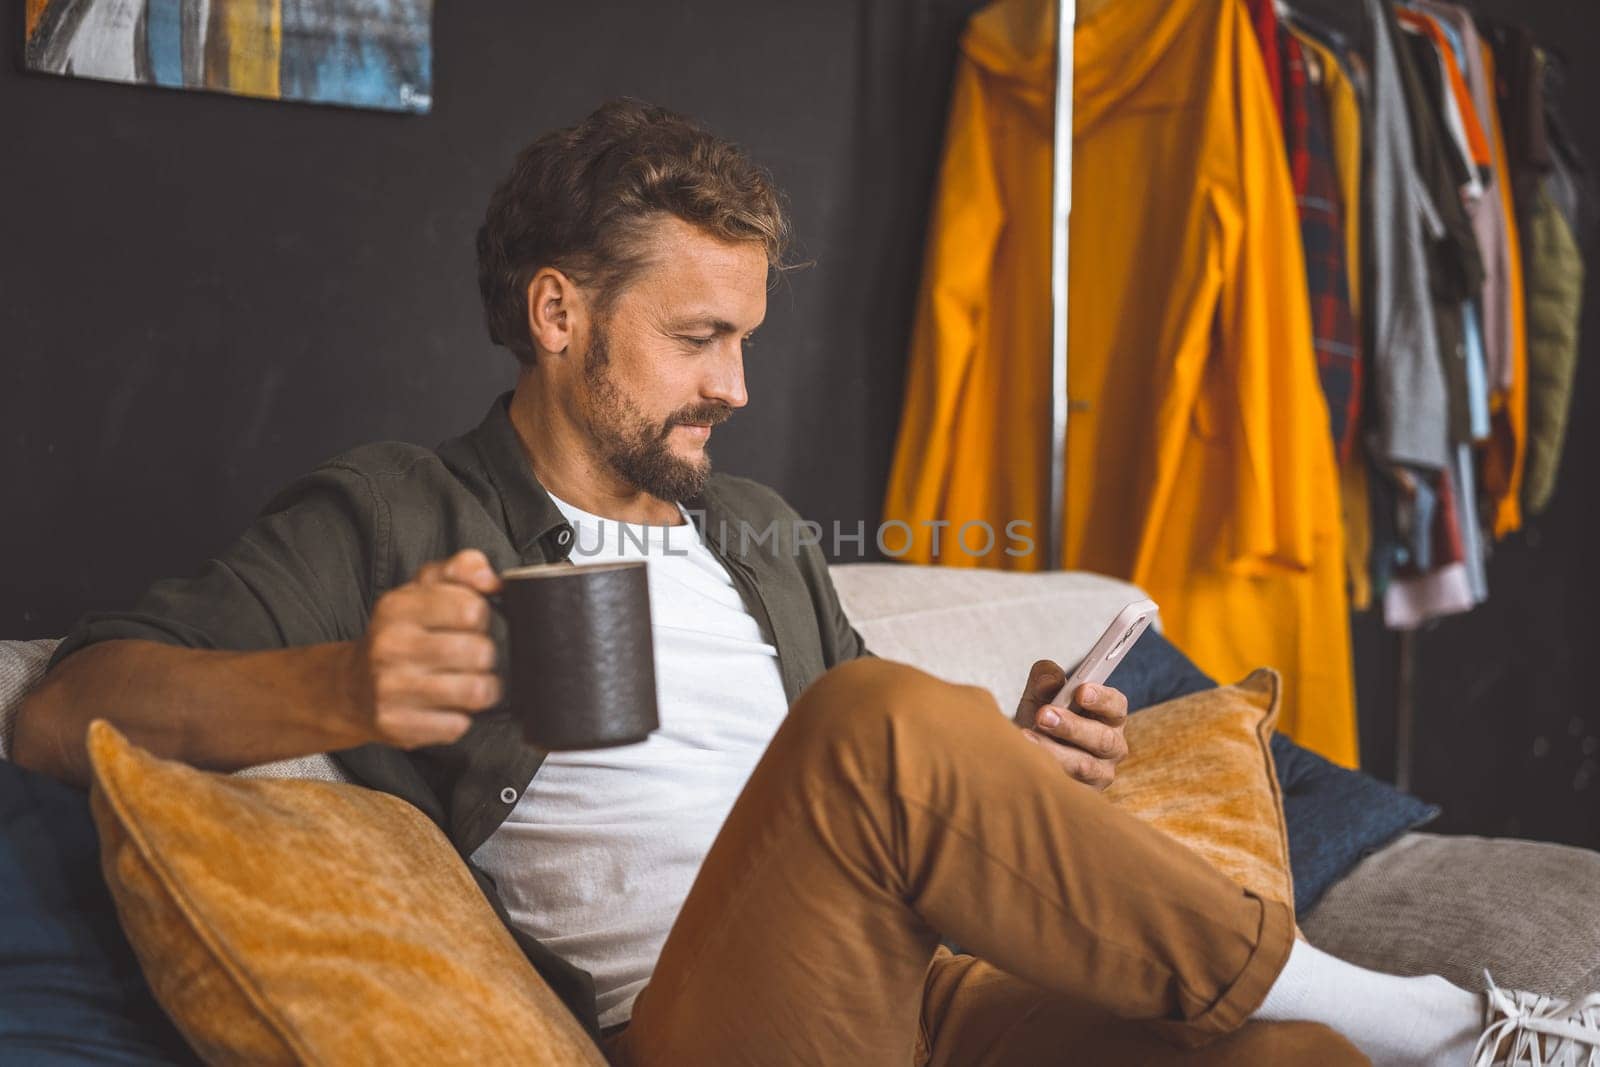 Man taking break at home, enjoying cup of coffee while focused on phone. Concept of spending time at home is emphasized, highlighting the importance of relaxation and leisure in our daily routines. High quality photo